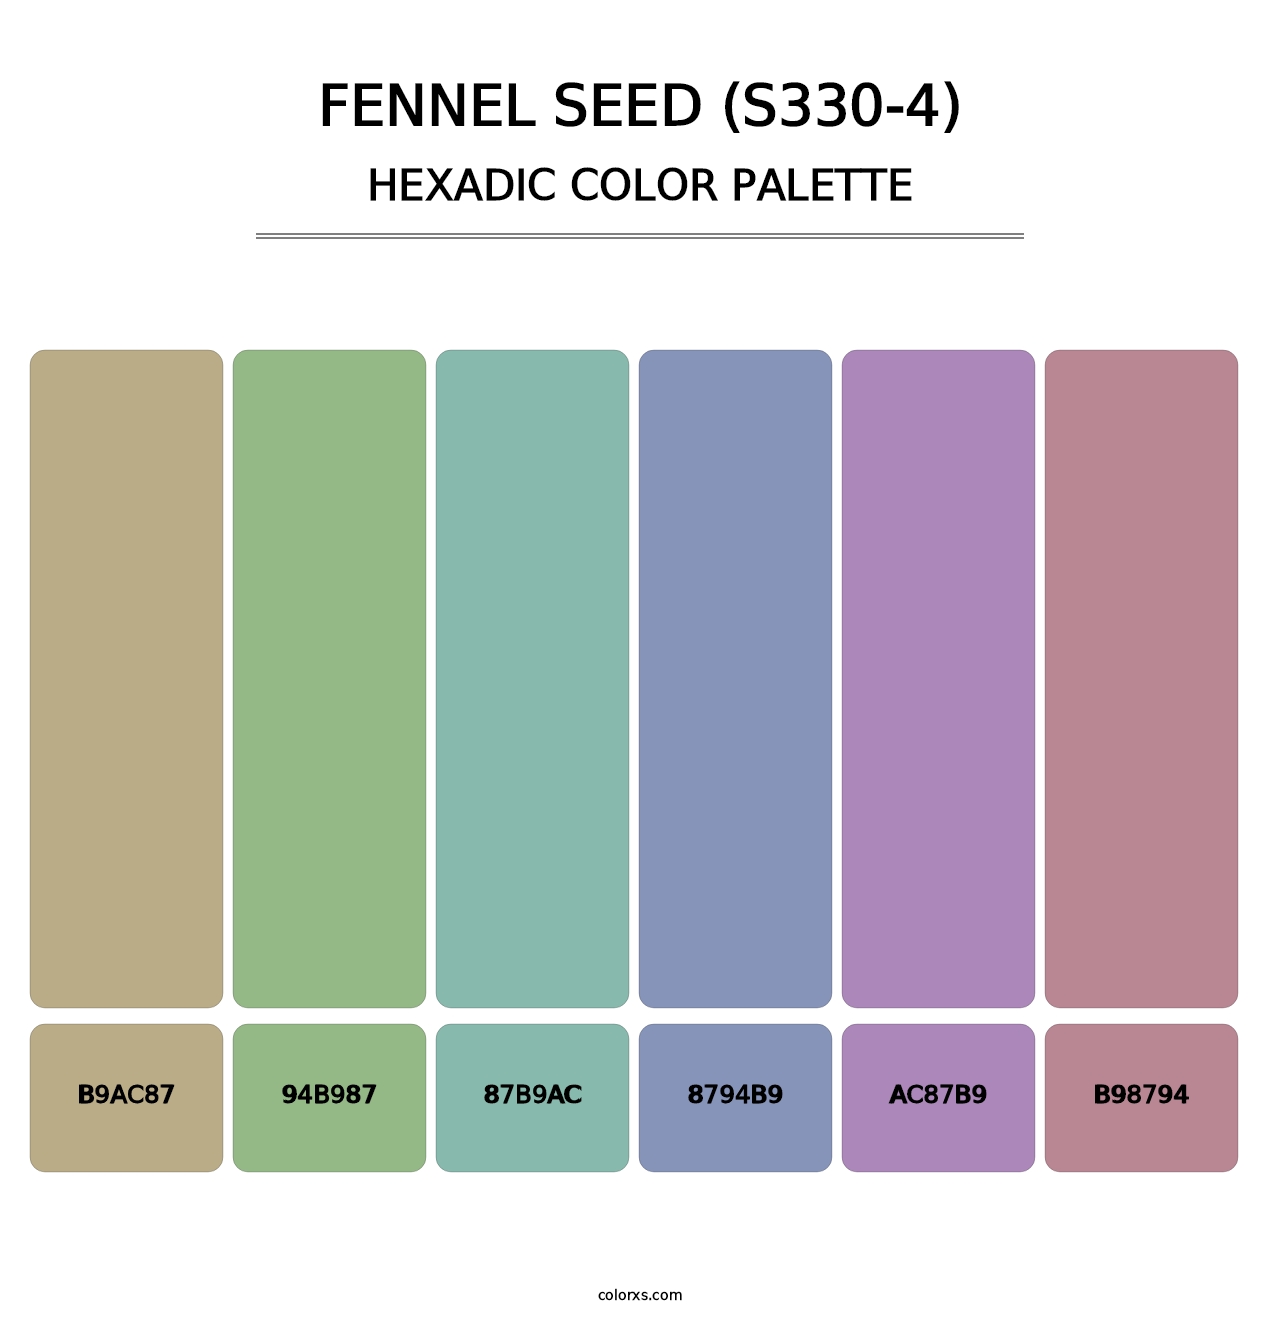 Fennel Seed (S330-4) - Hexadic Color Palette